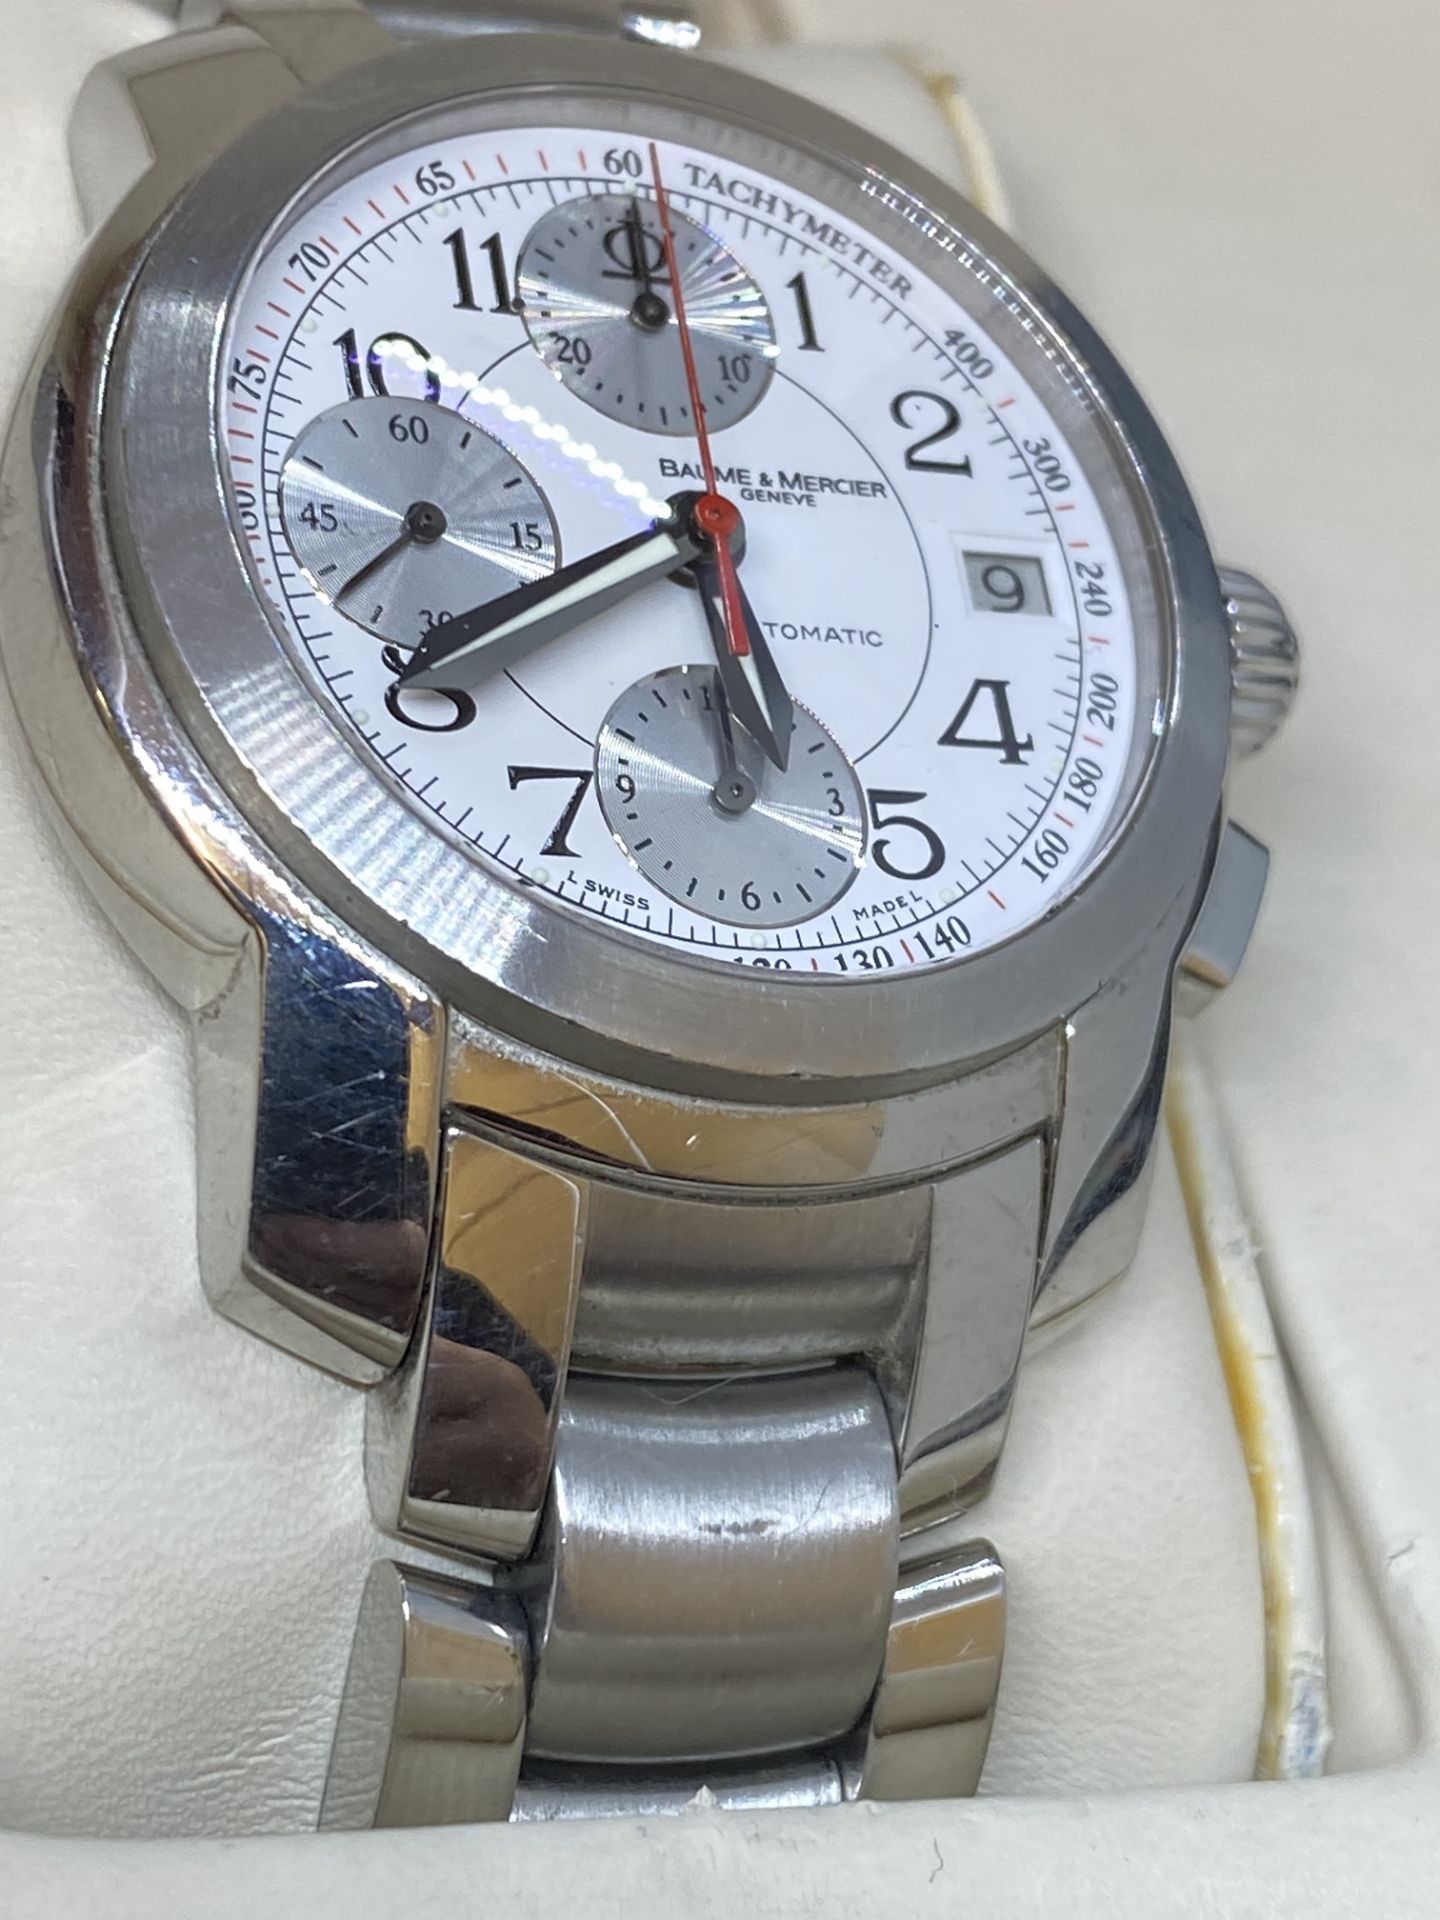 BAUME & MERCIER AUTOMATIC STAINLESS STEEL CHRONO WATCH - Image 3 of 8